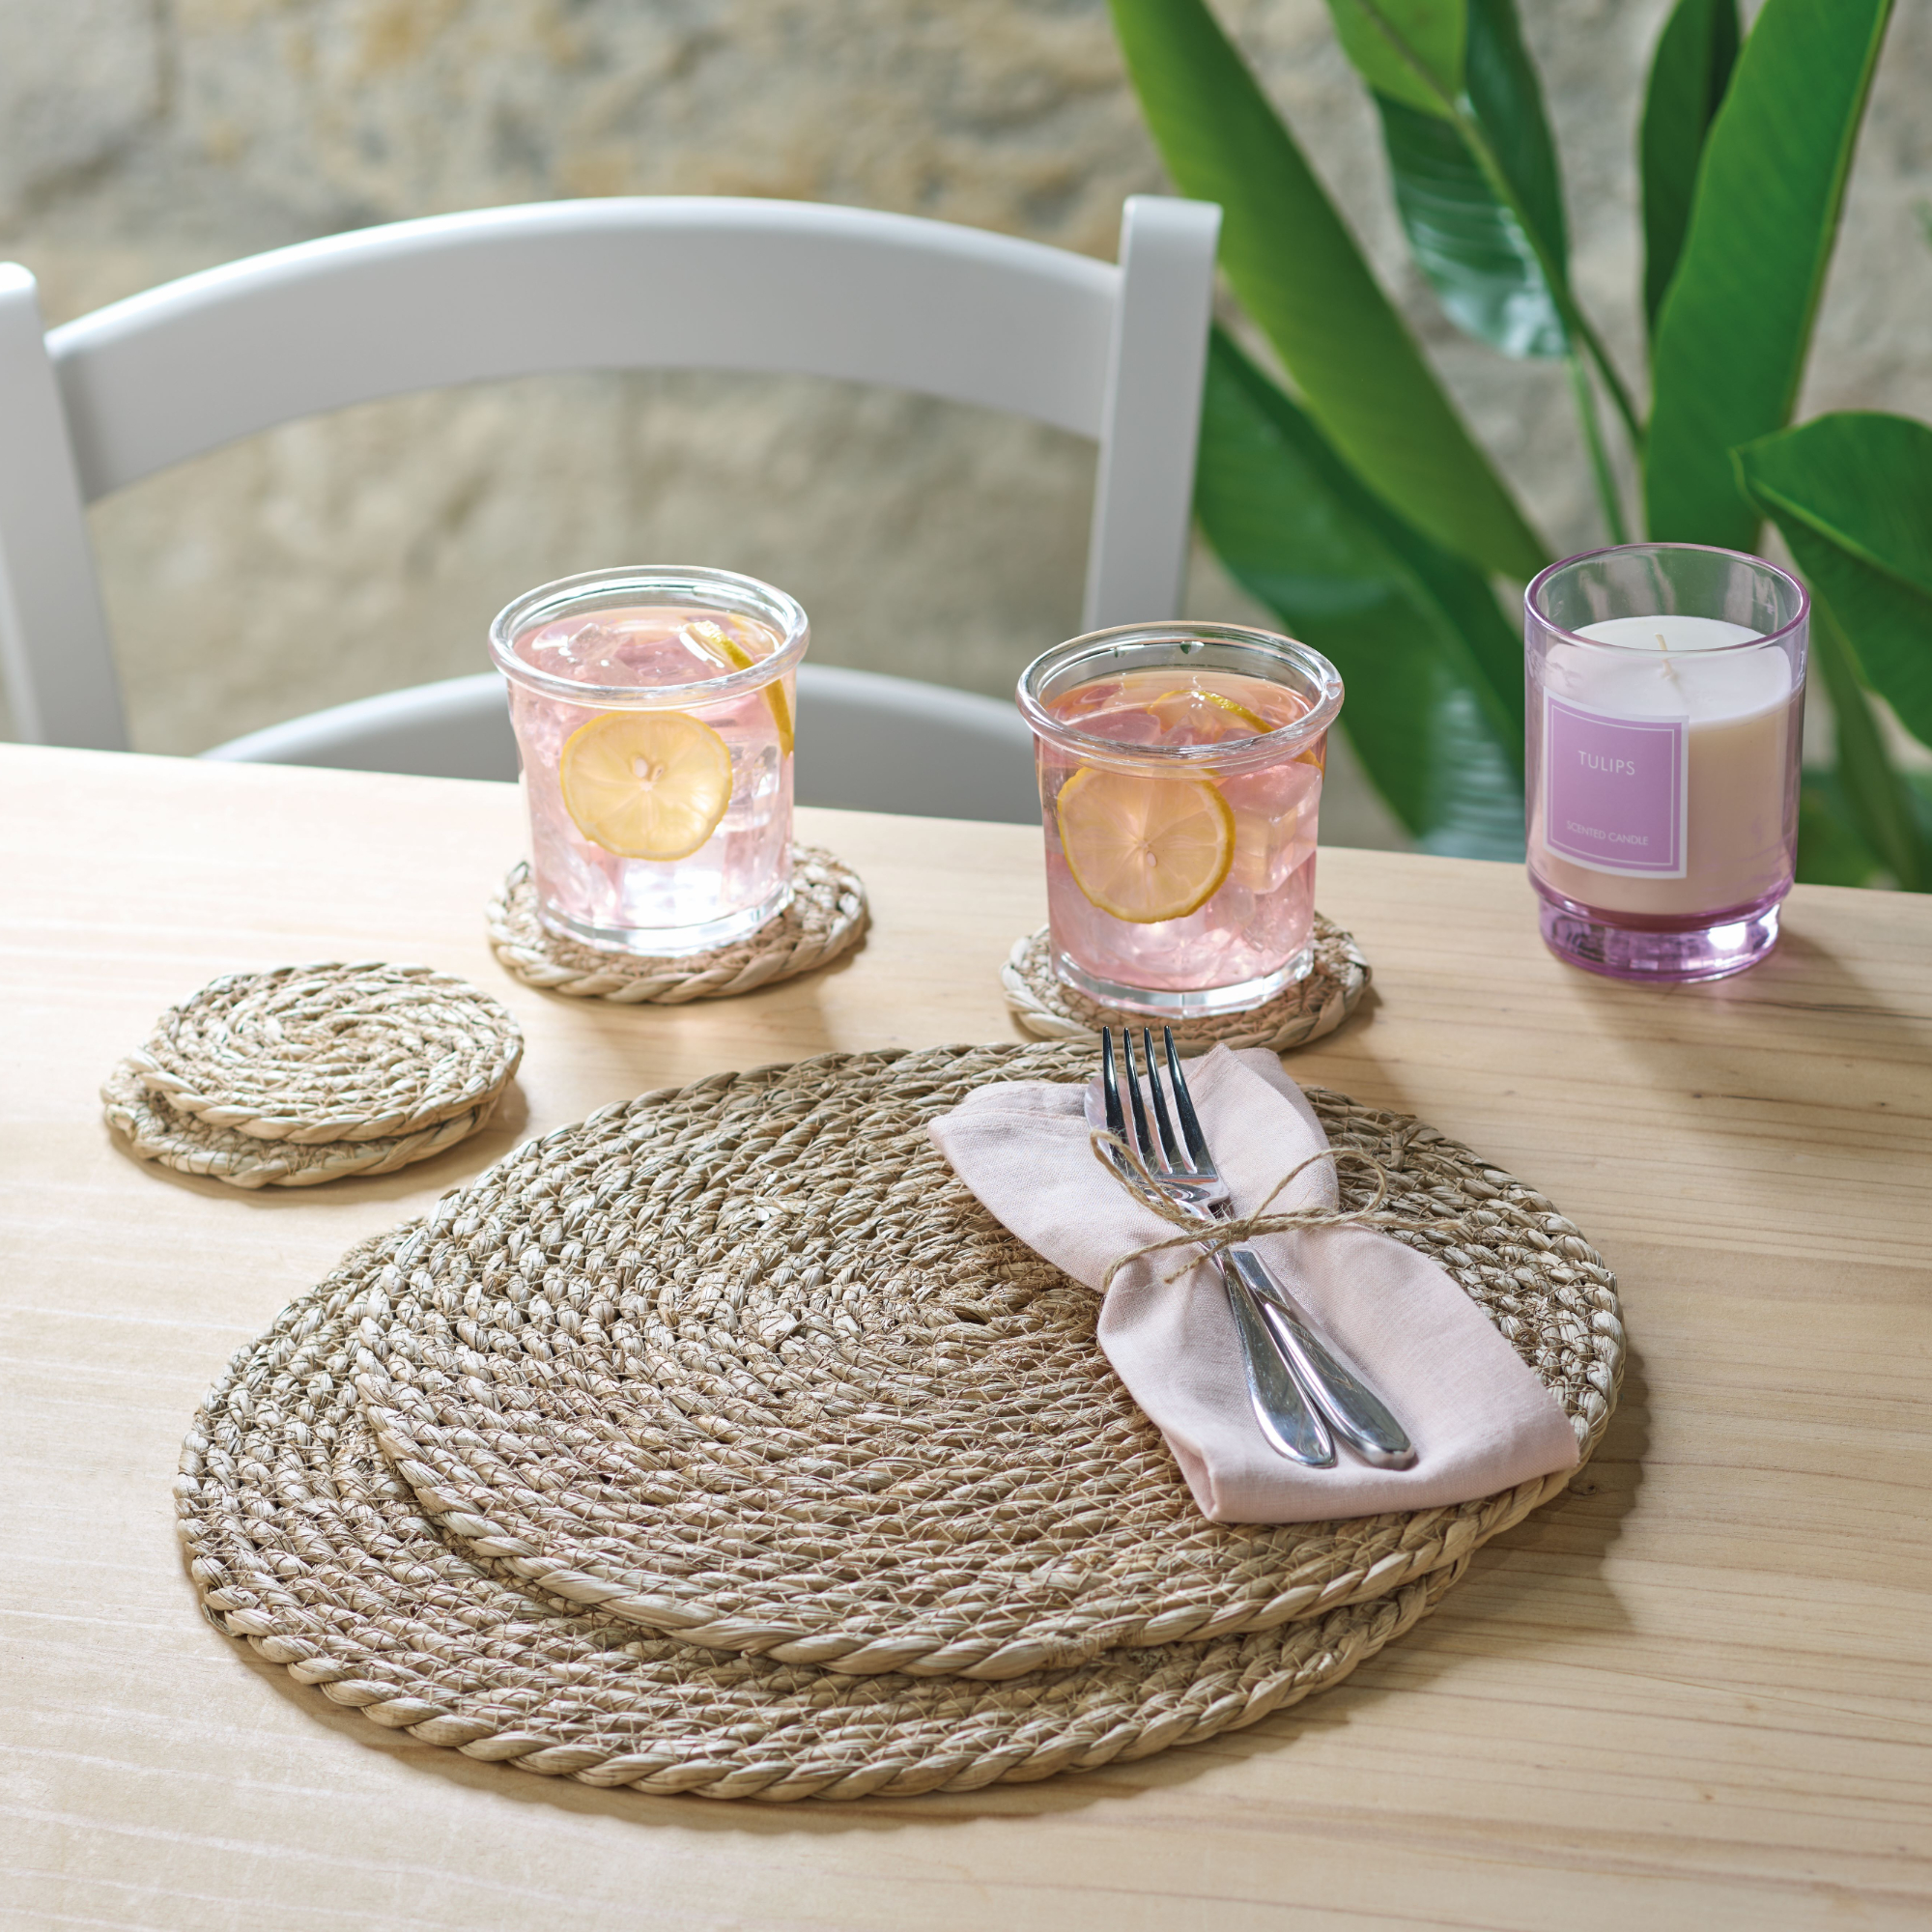 Seagrass placemats and coasters on table